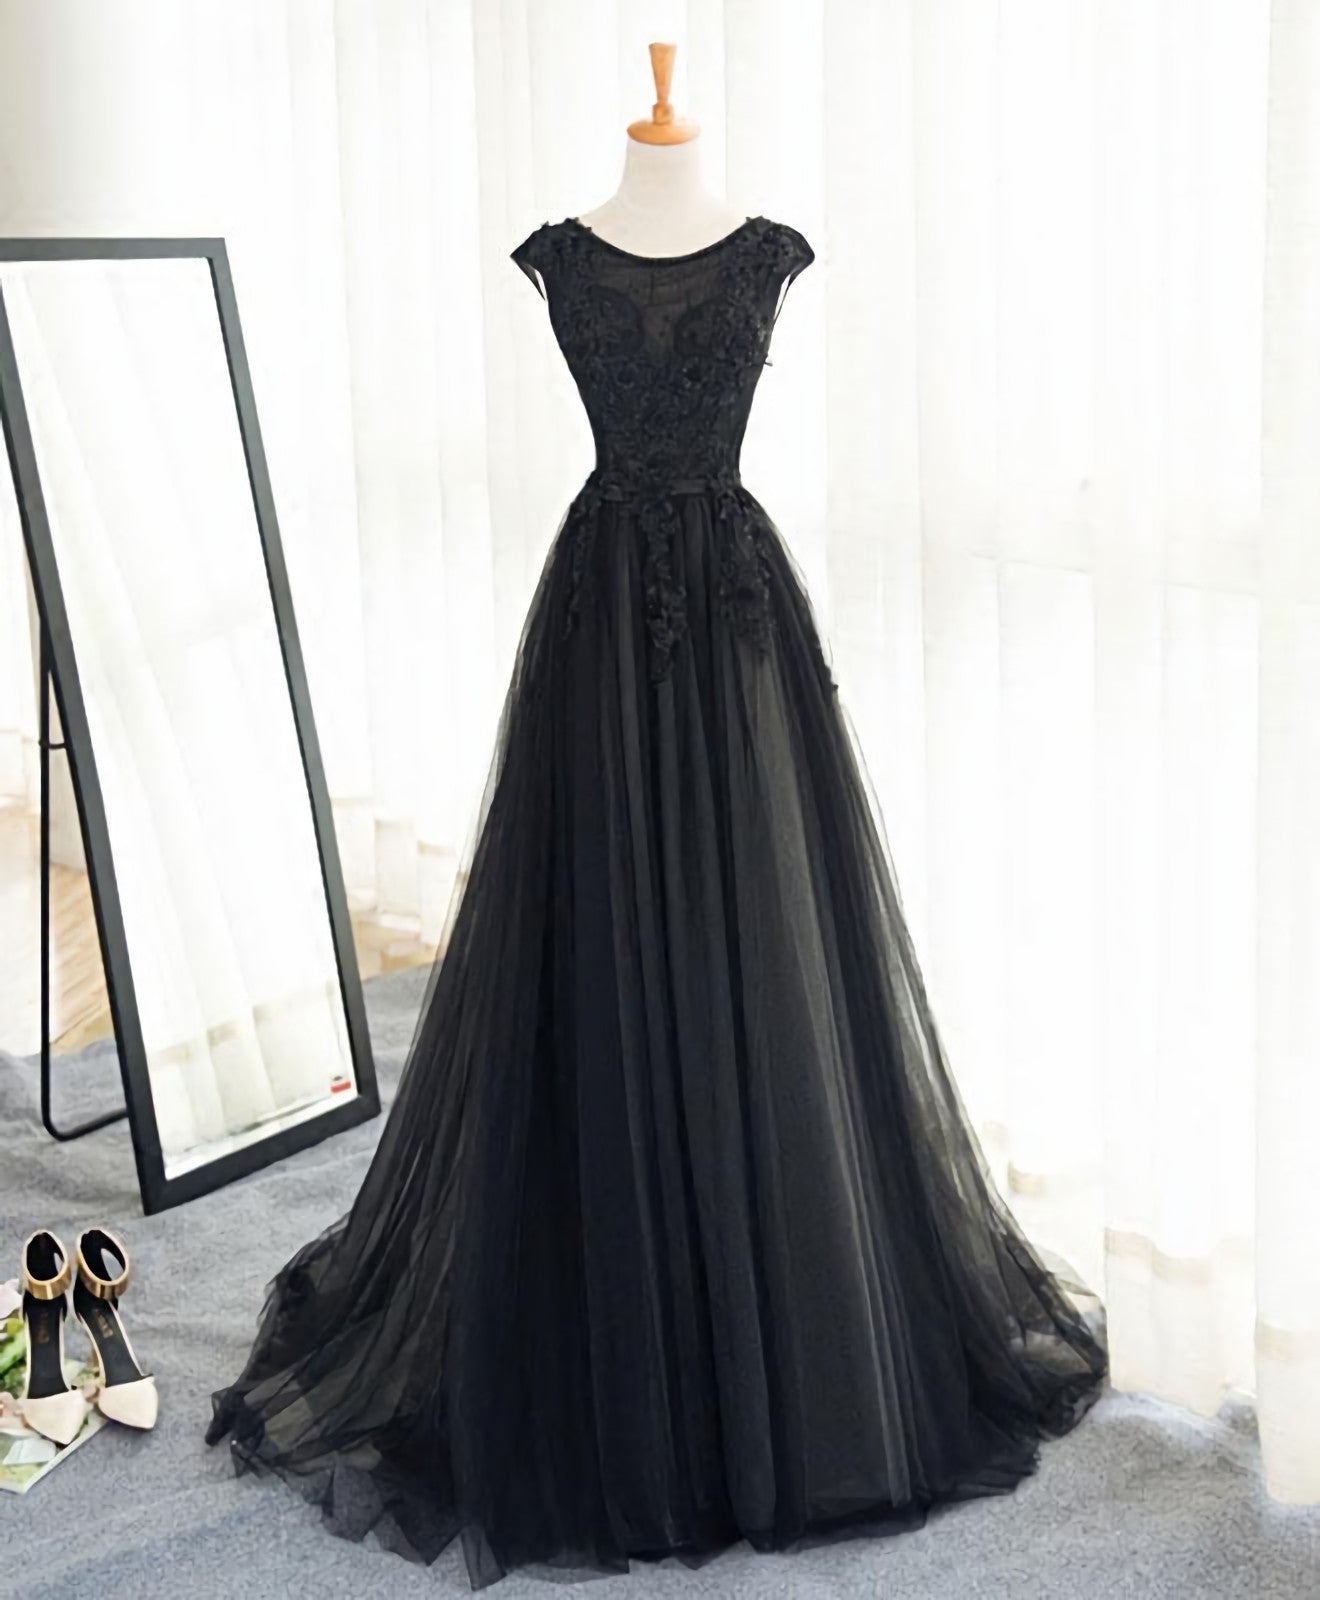 Homecoming Dress Sweetheart, Black A Line Tulle Lace Long Prom Dress, Evening Dress